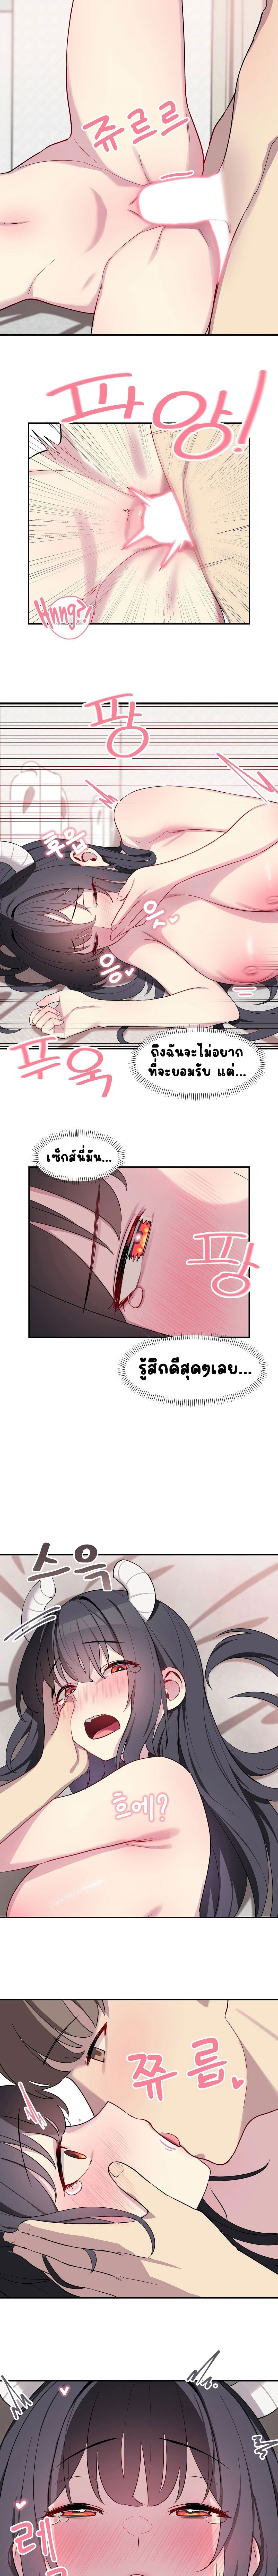 Hospitalized Life in Another World ตอนที่ 3 ภาพ 8